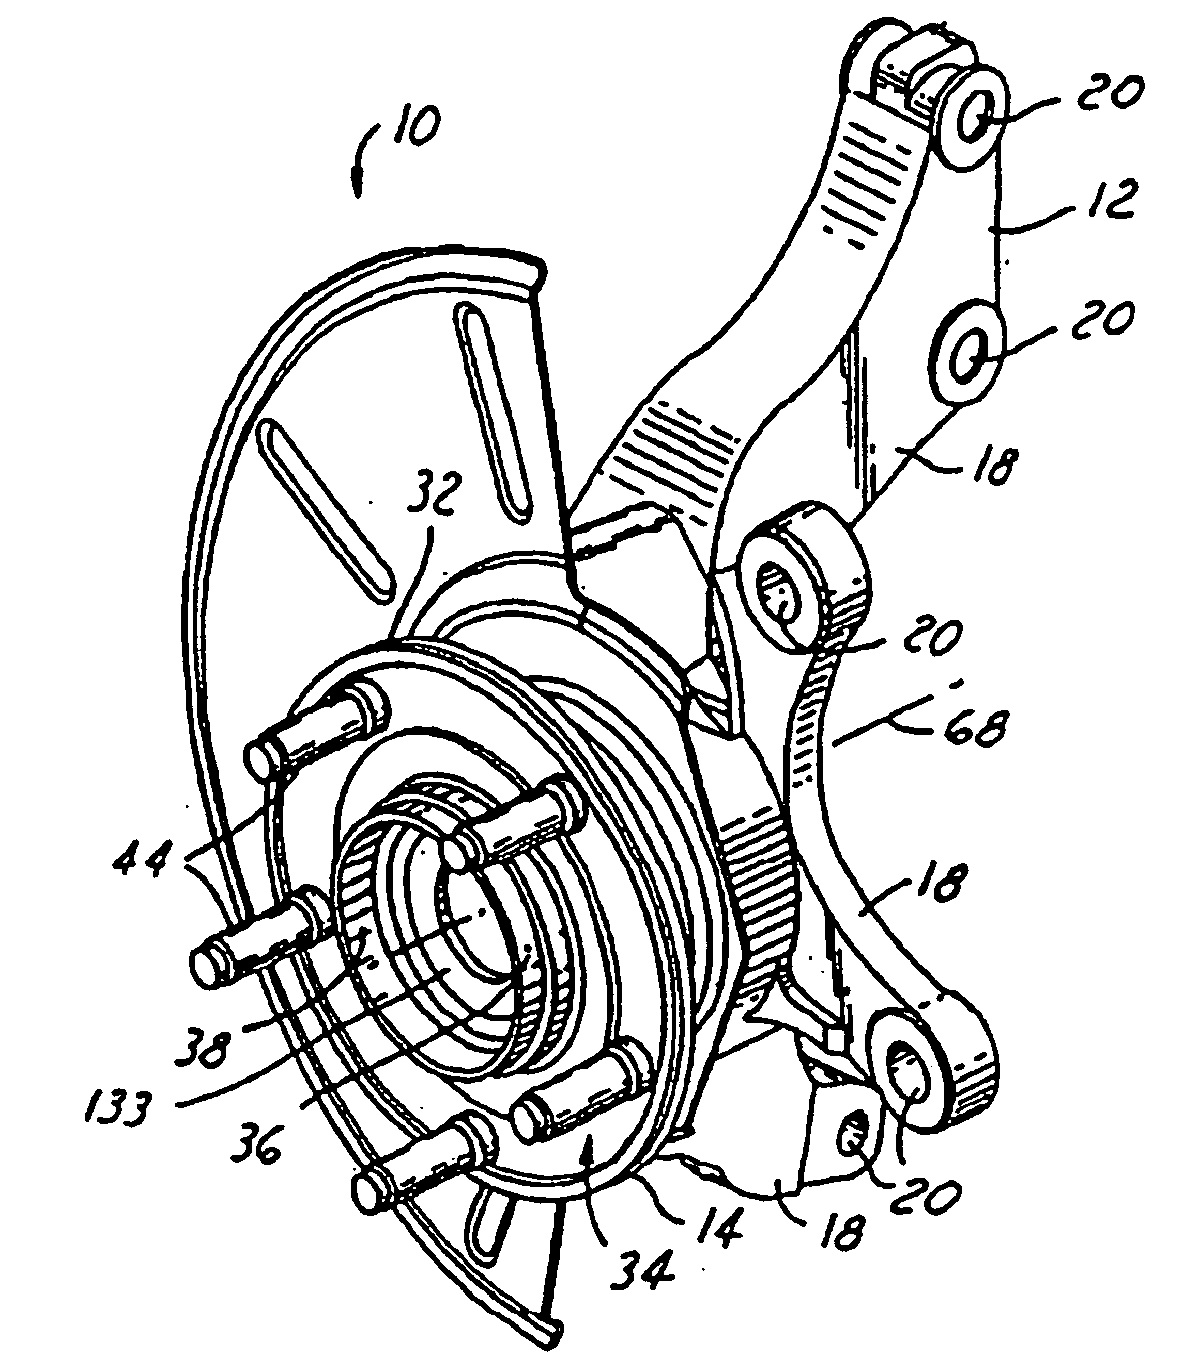 Knuckle hub assembly and method for making same